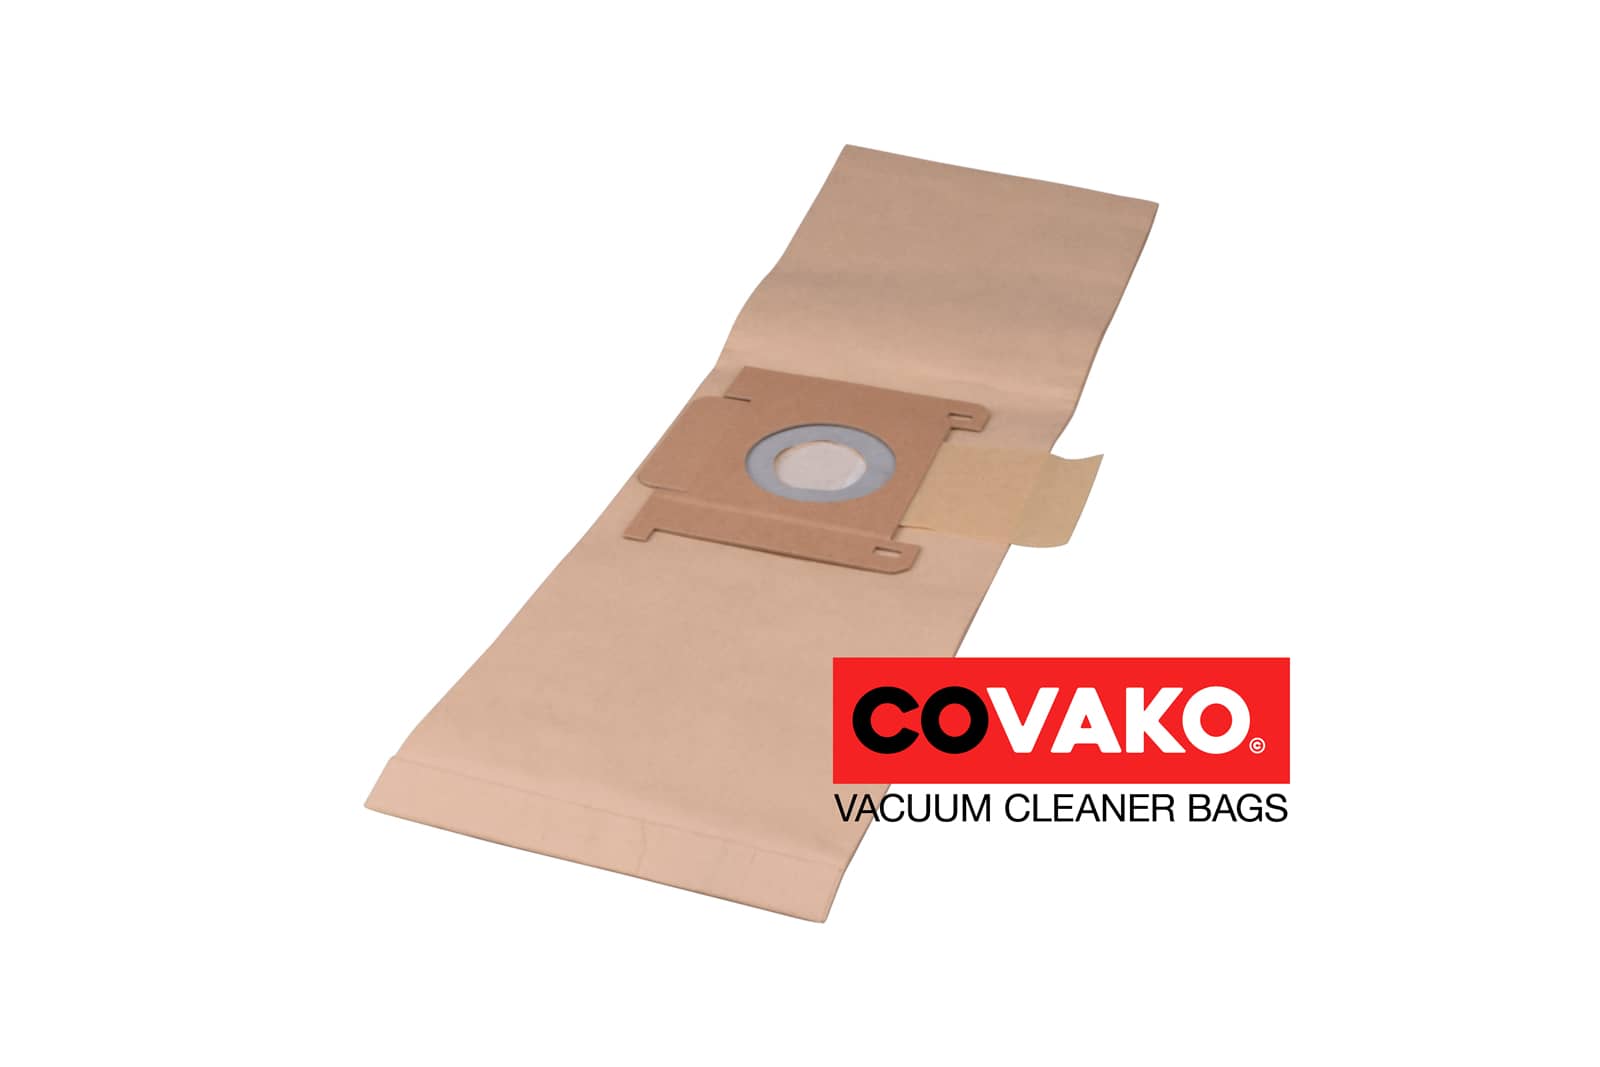 Oehme Otto C 06 / Paper - Oehme Otto vacuum cleaner bags